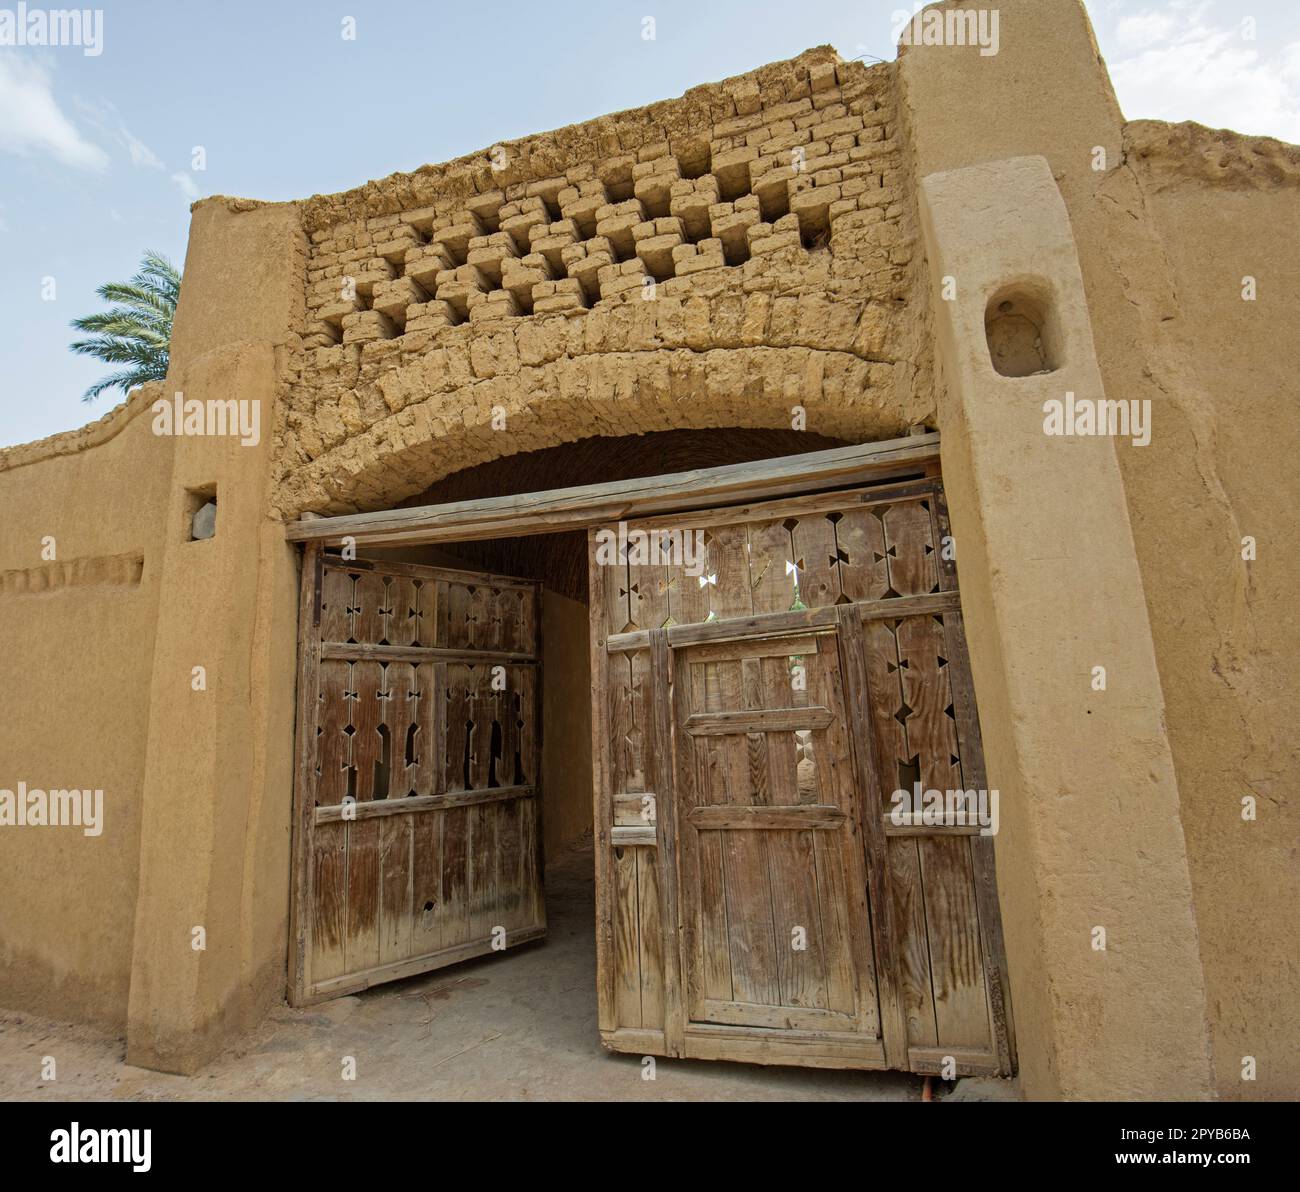 Old rustic wooden door entrance gate in wall of traditional mud brick egyptian house Stock Photo